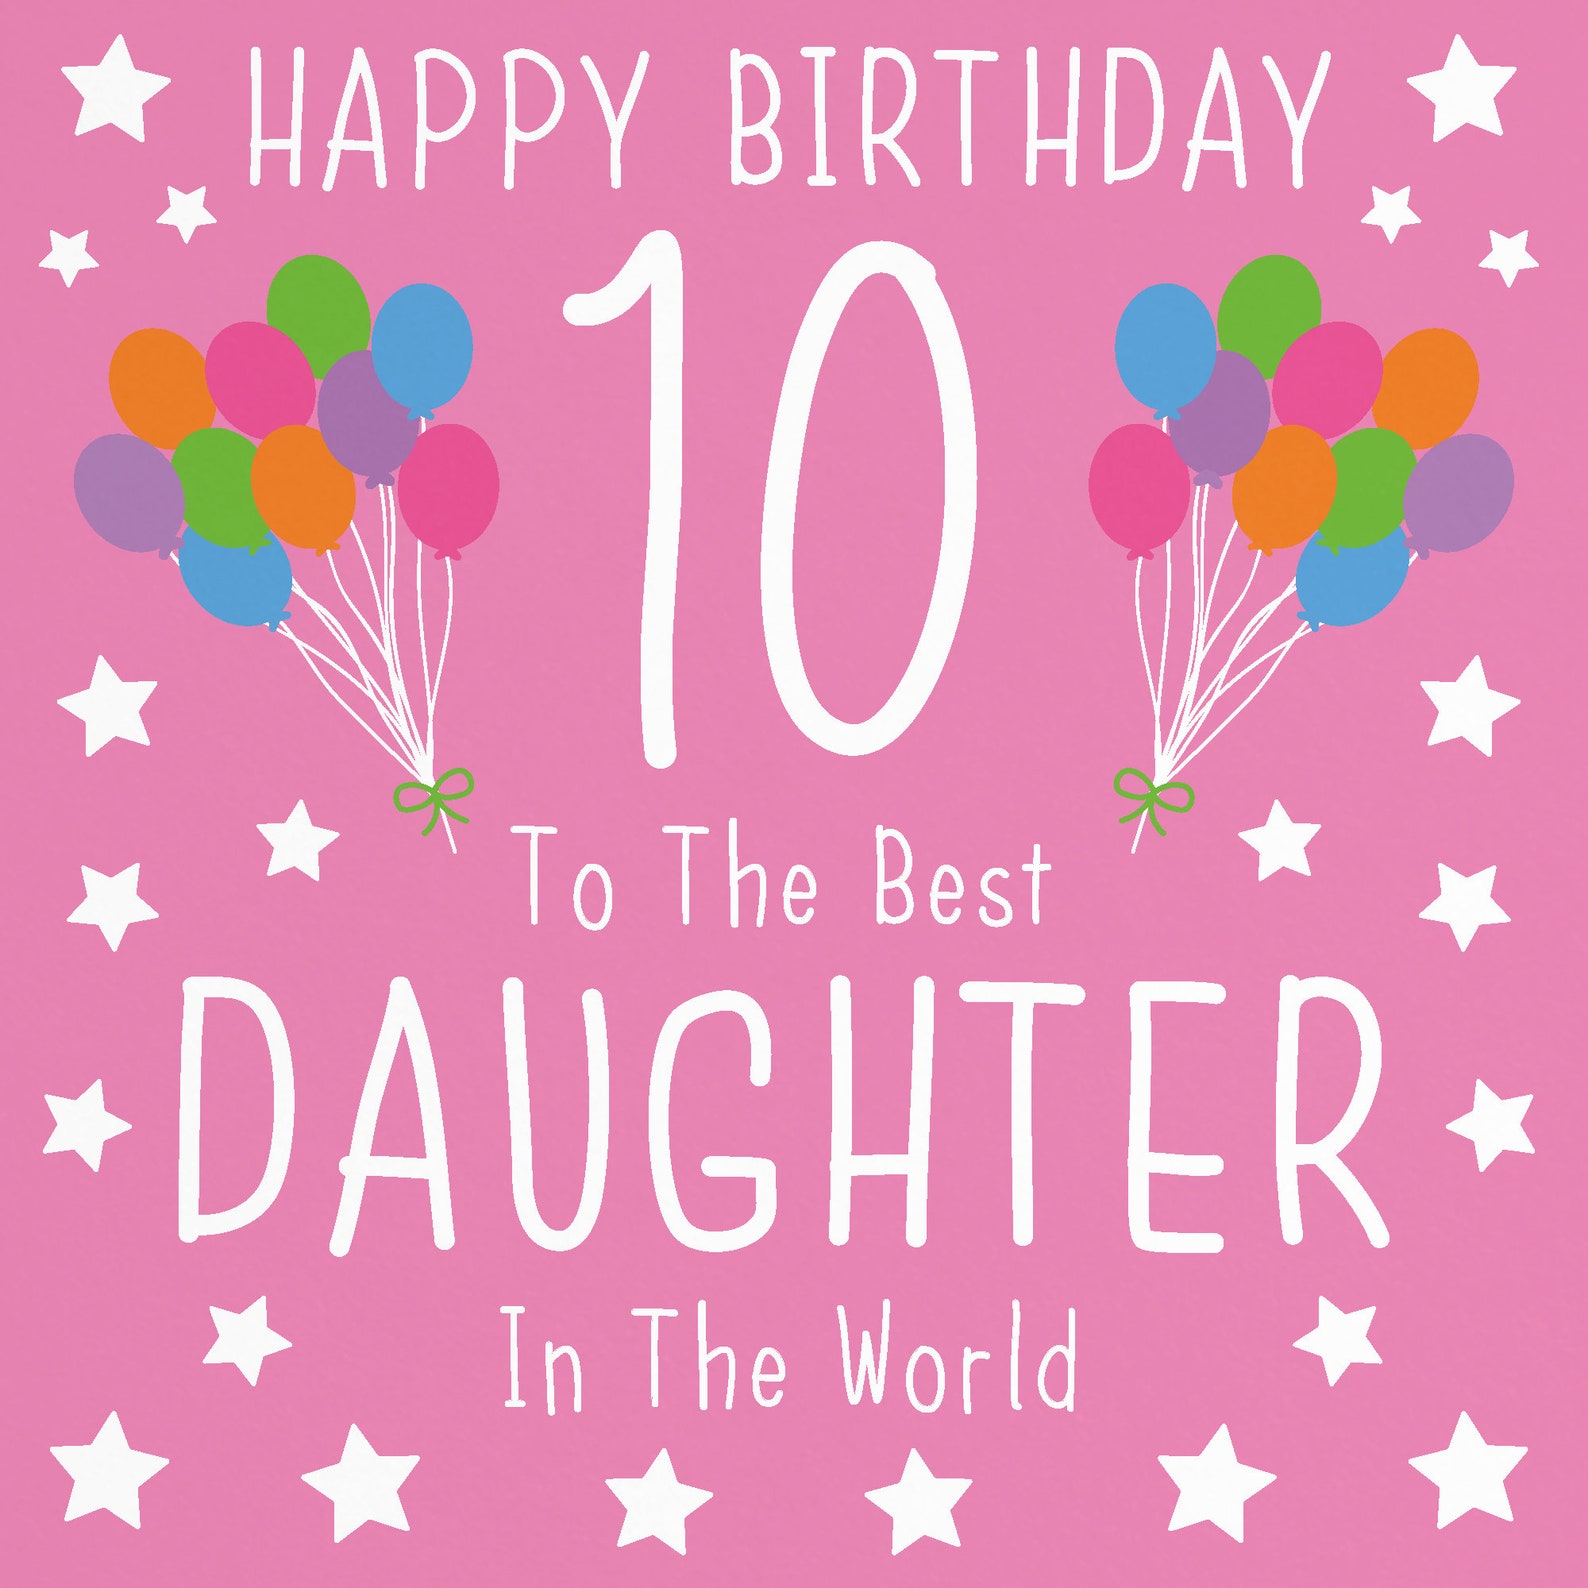 daughter-10th-birthday-card-happy-birthday-10-to-the-etsy-uk